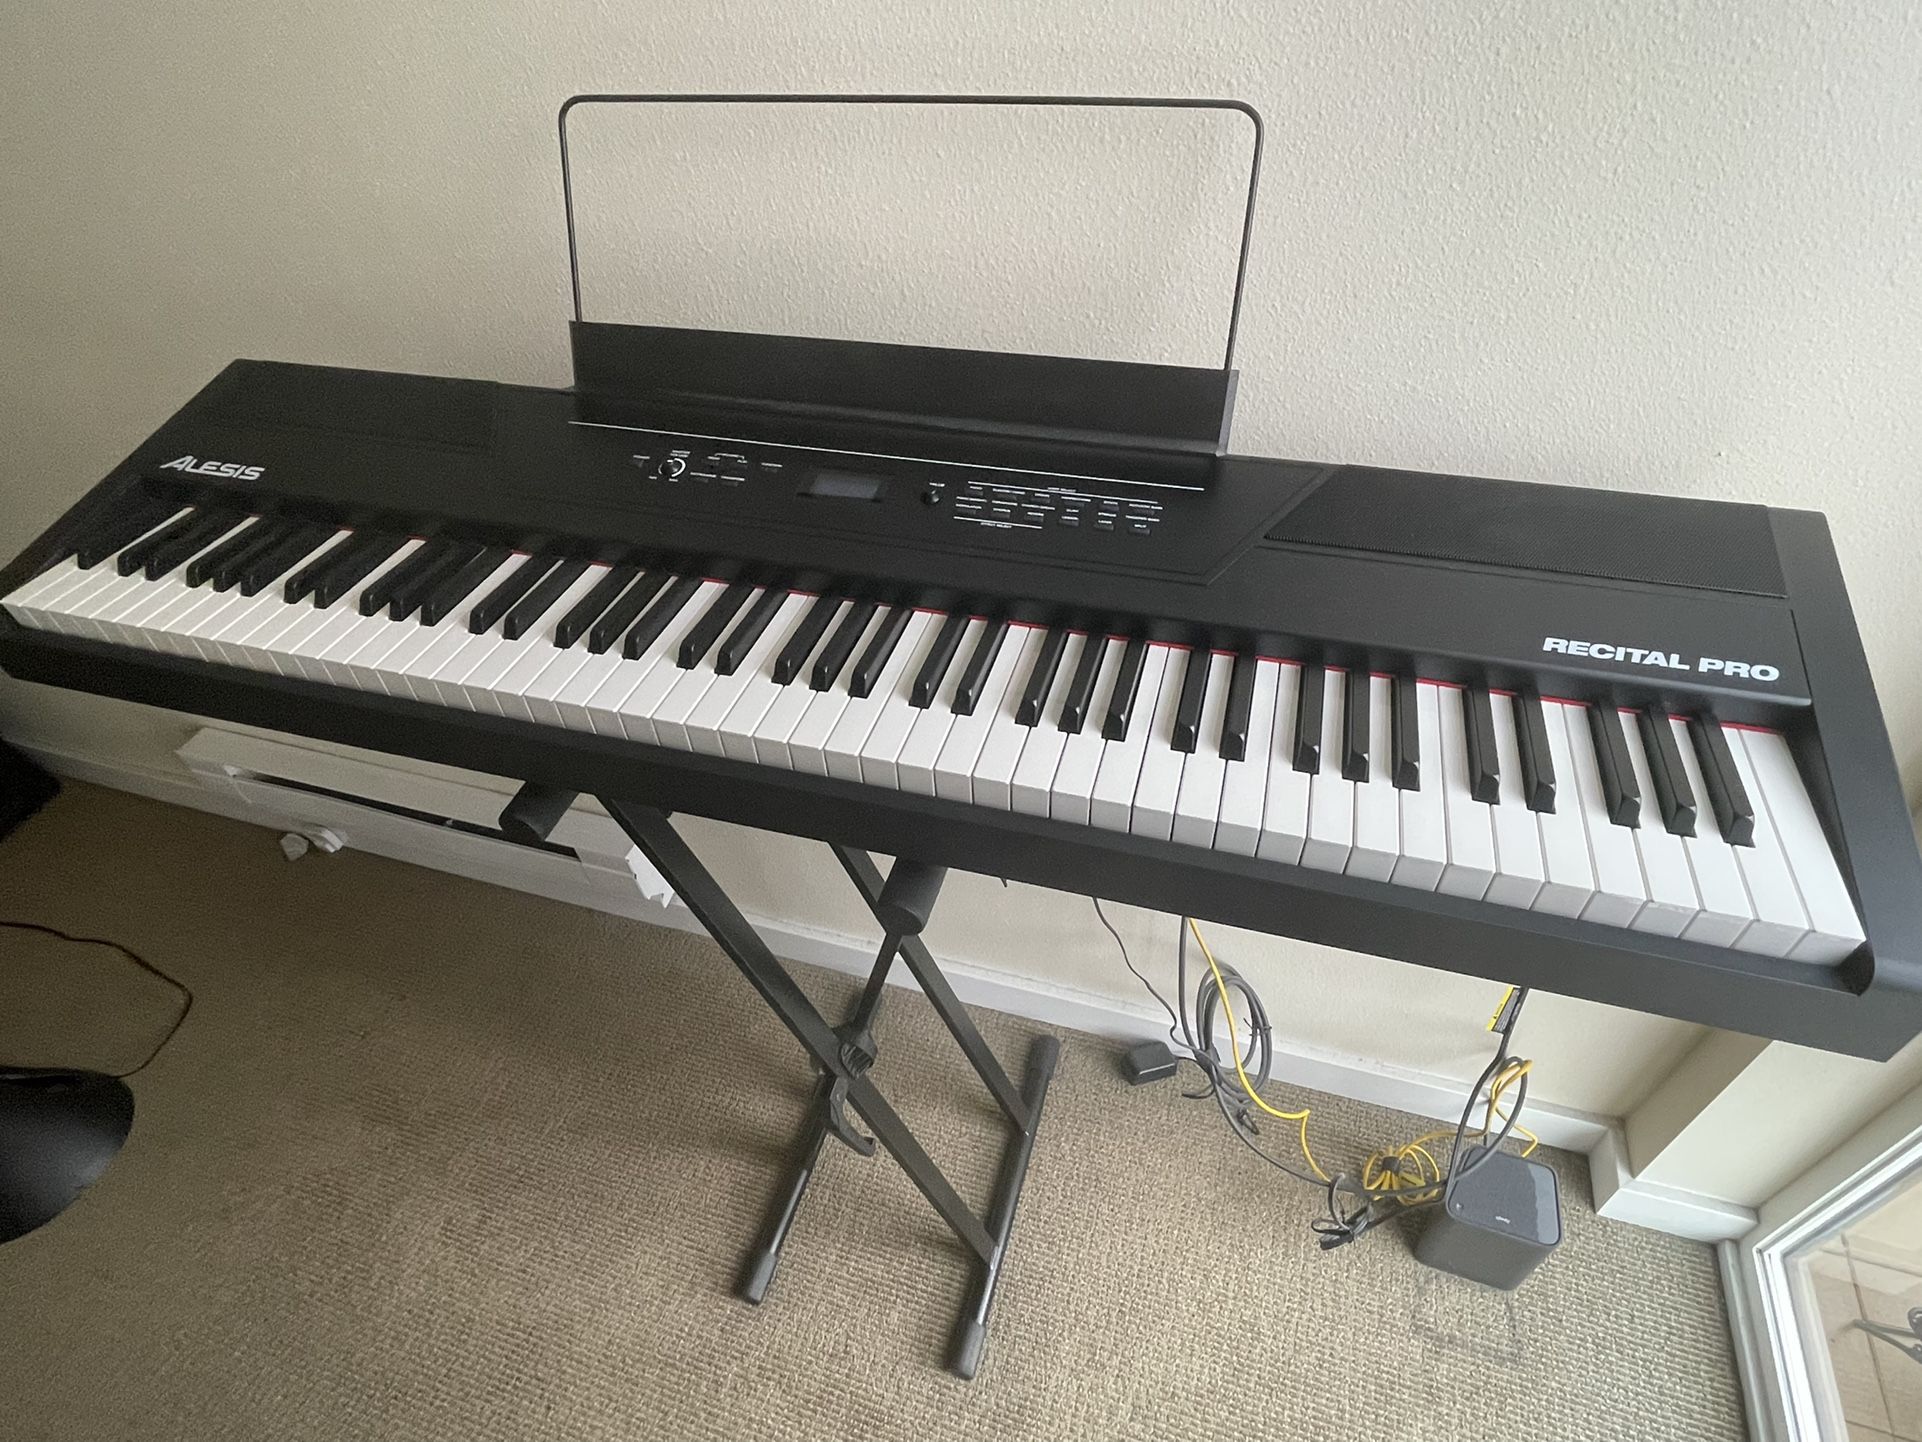 Alesis Recital Pro Keyboard With Heavy Duty Adjustable Stand